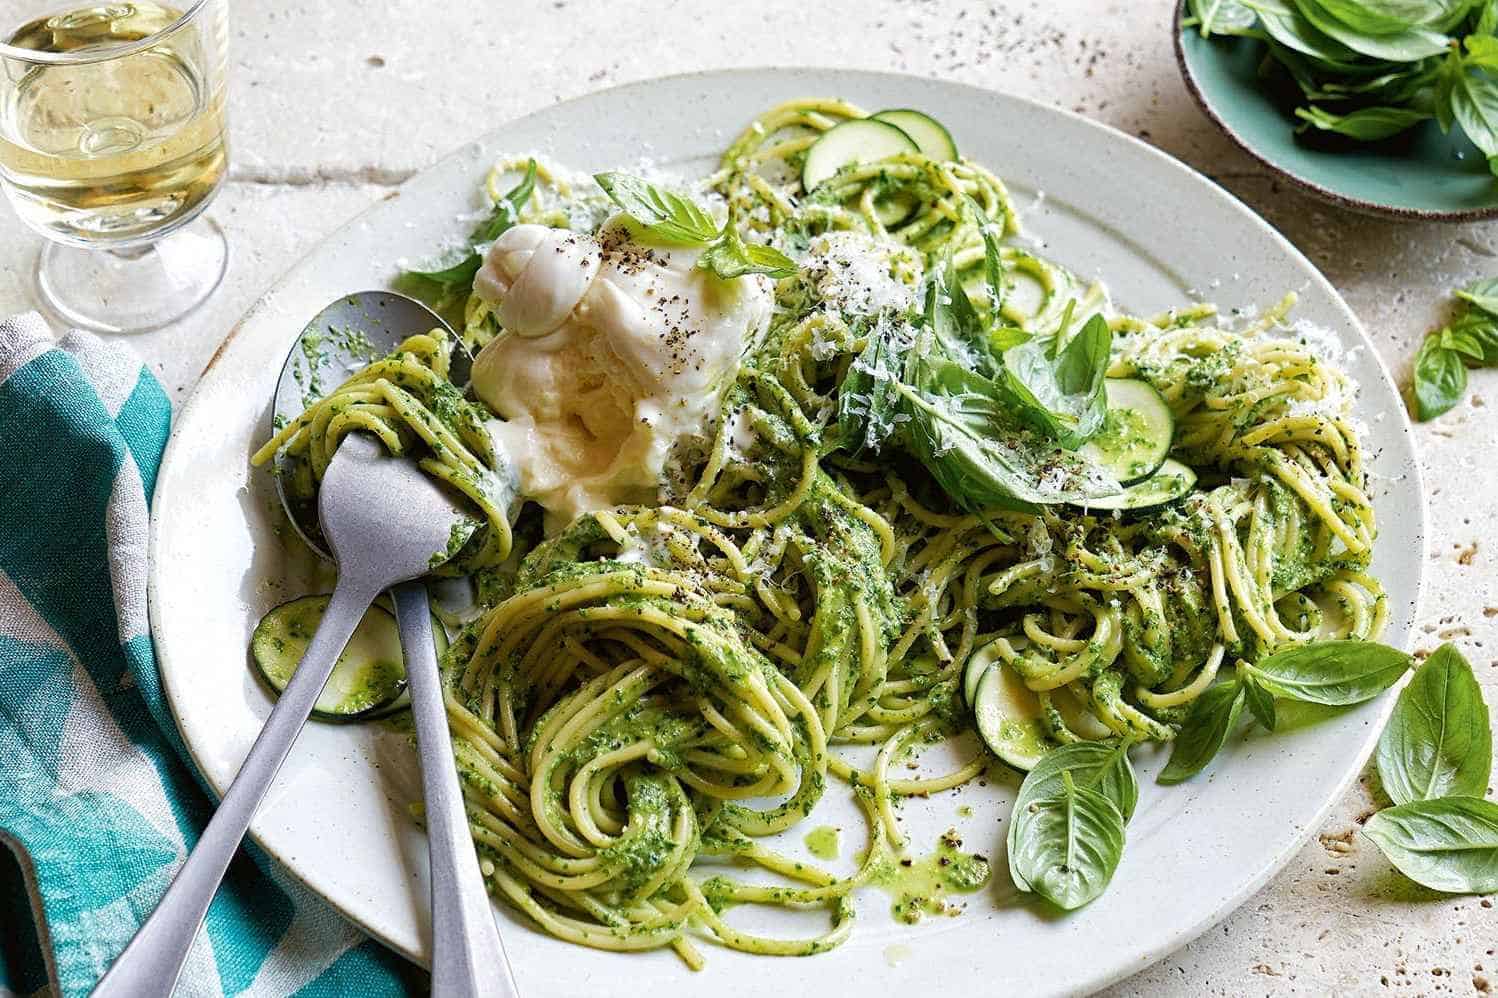 What-Wine-Goes-With-Pesto-based-Pasta